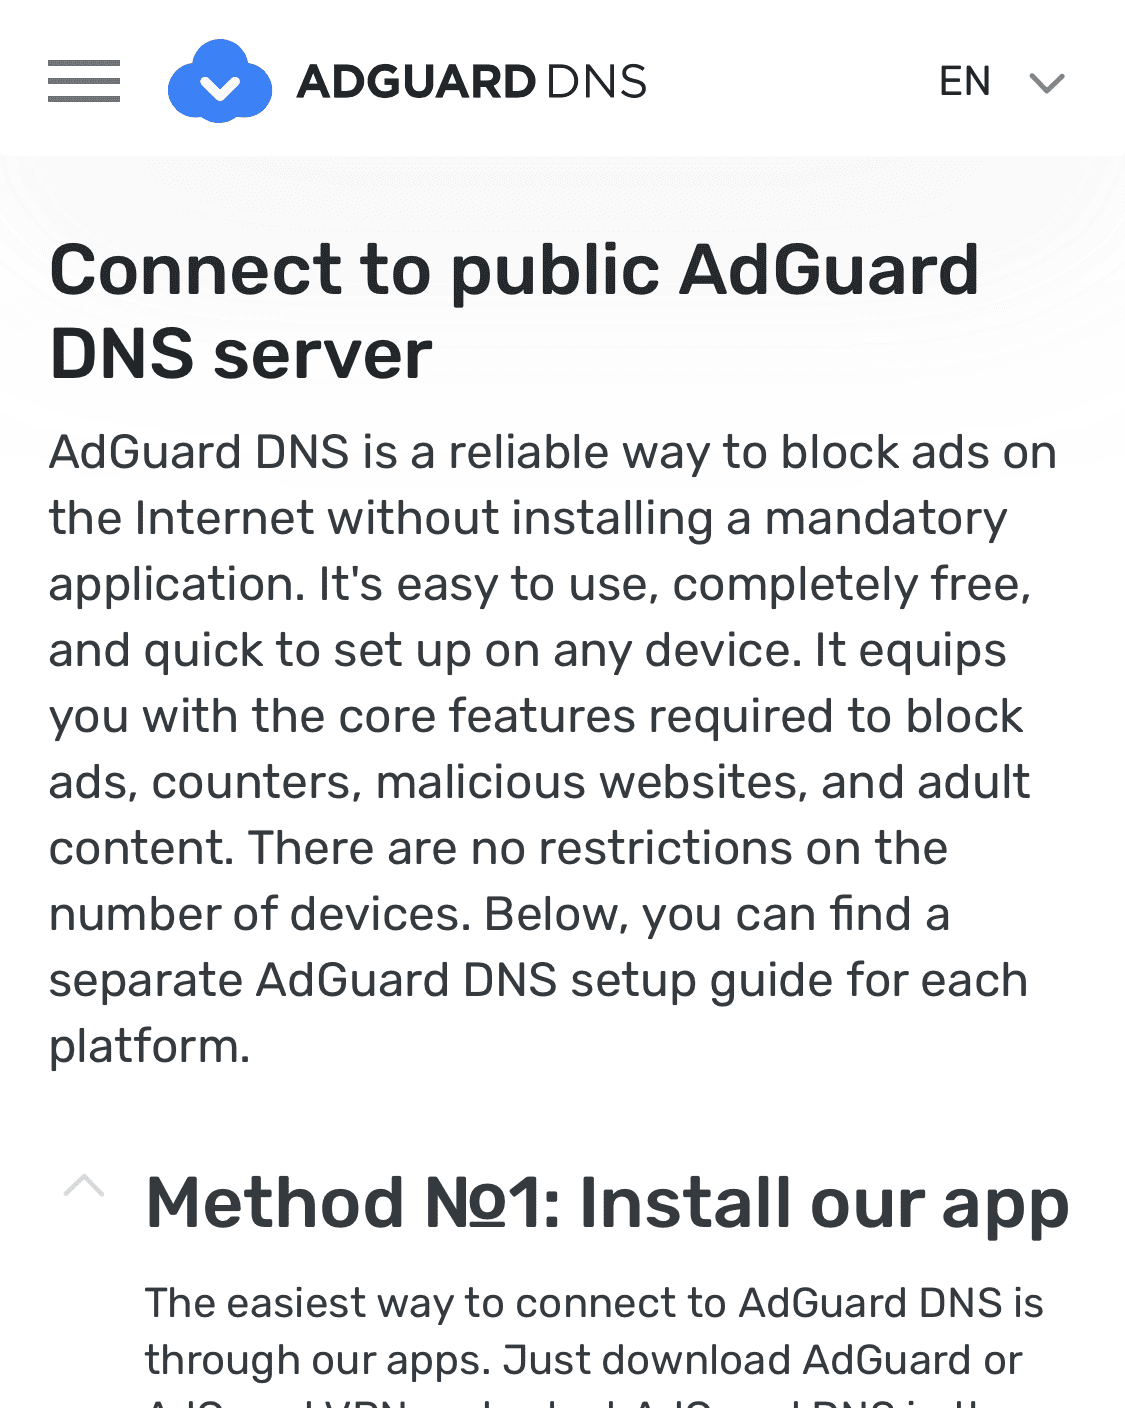 connect to public adguard DNS for iPhone